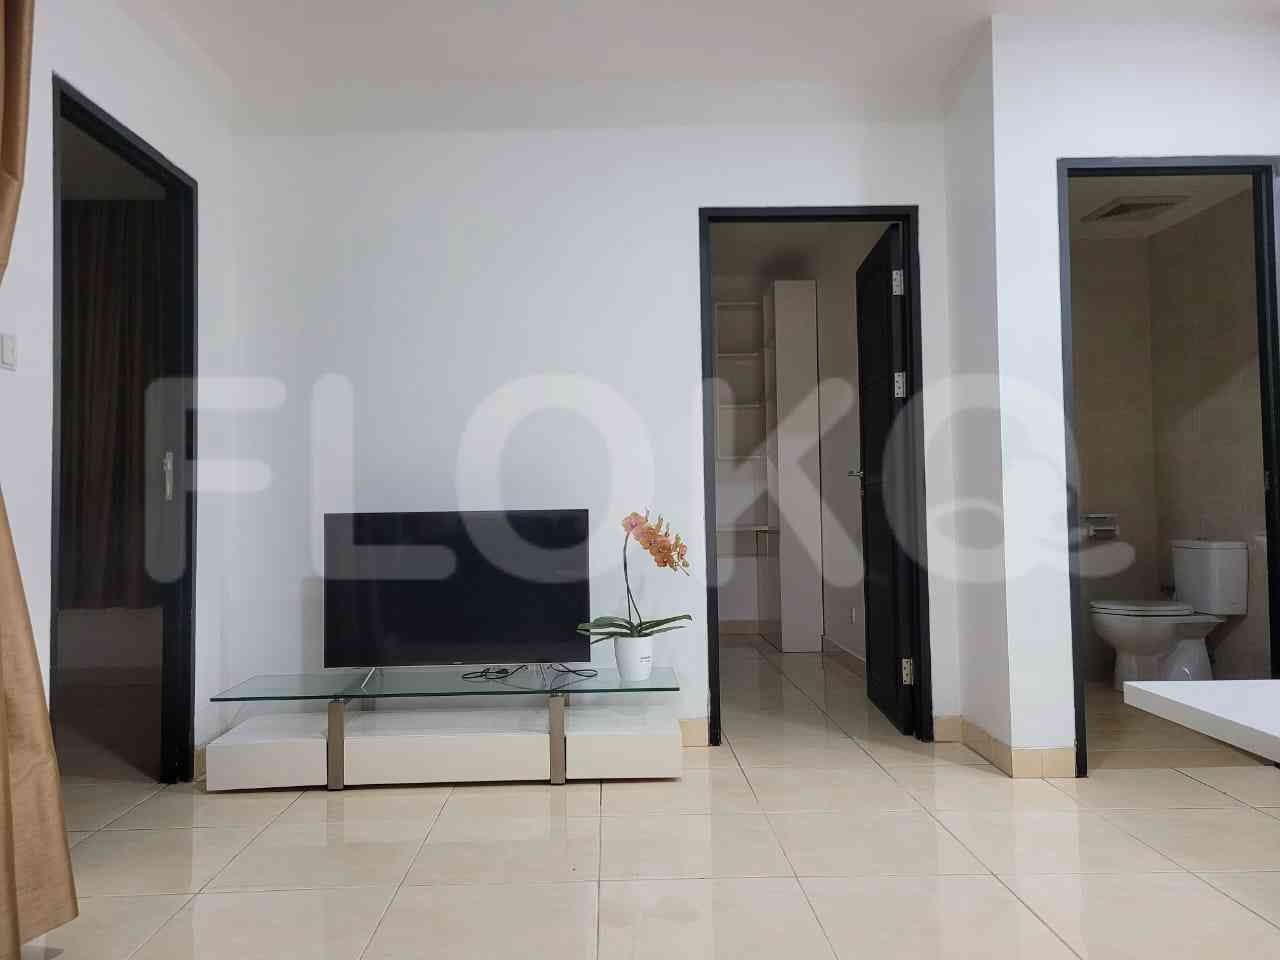 3 Bedroom on 12th Floor for Rent in Essence Darmawangsa Apartment - fci646 9